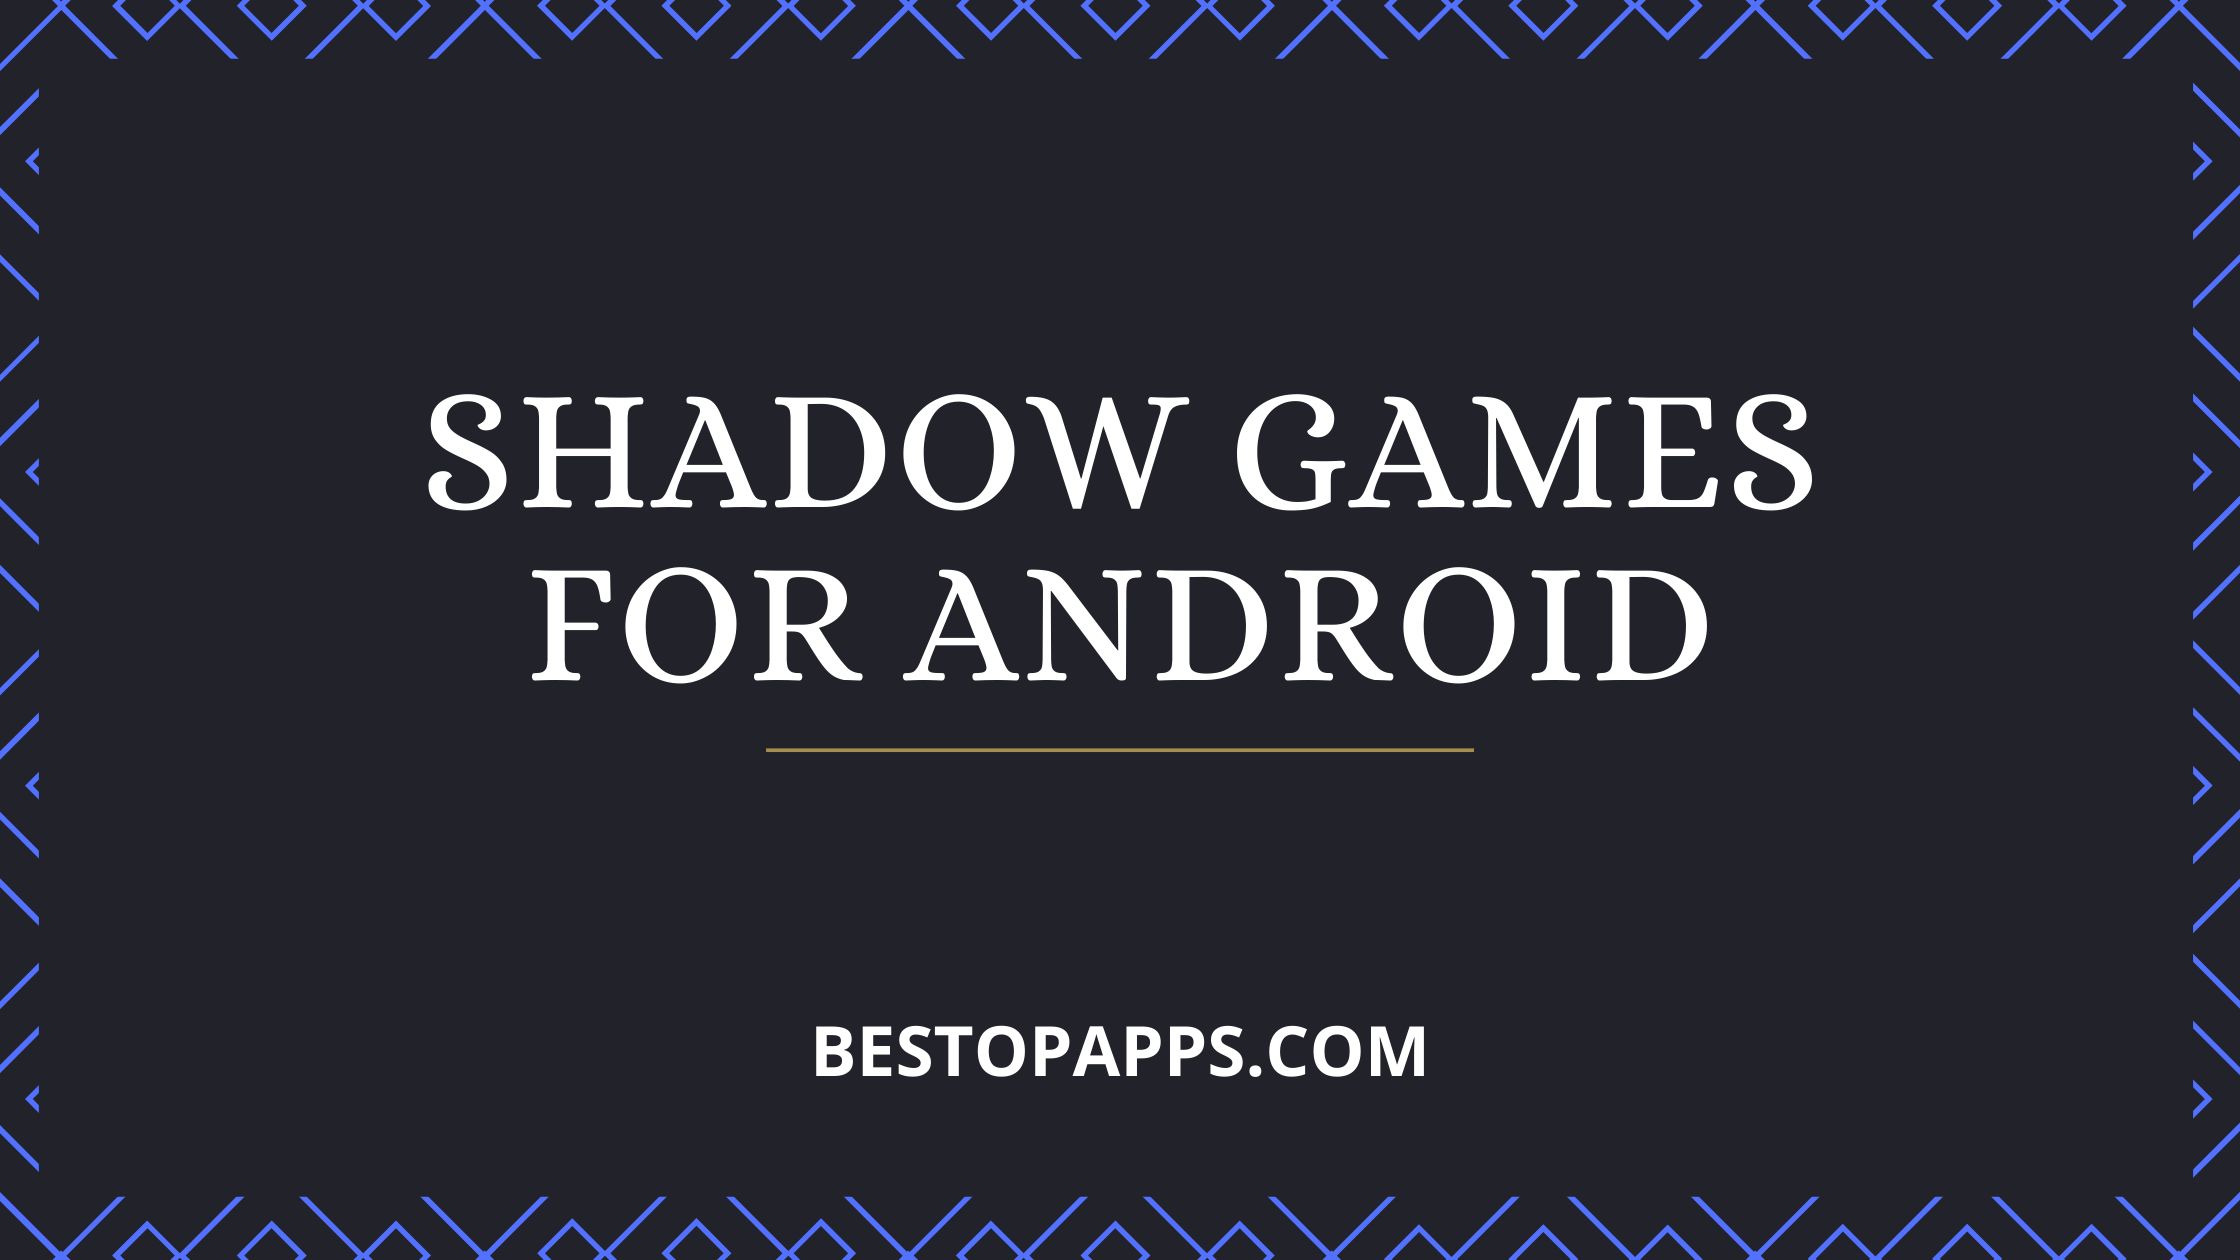 Shadow Games for Android